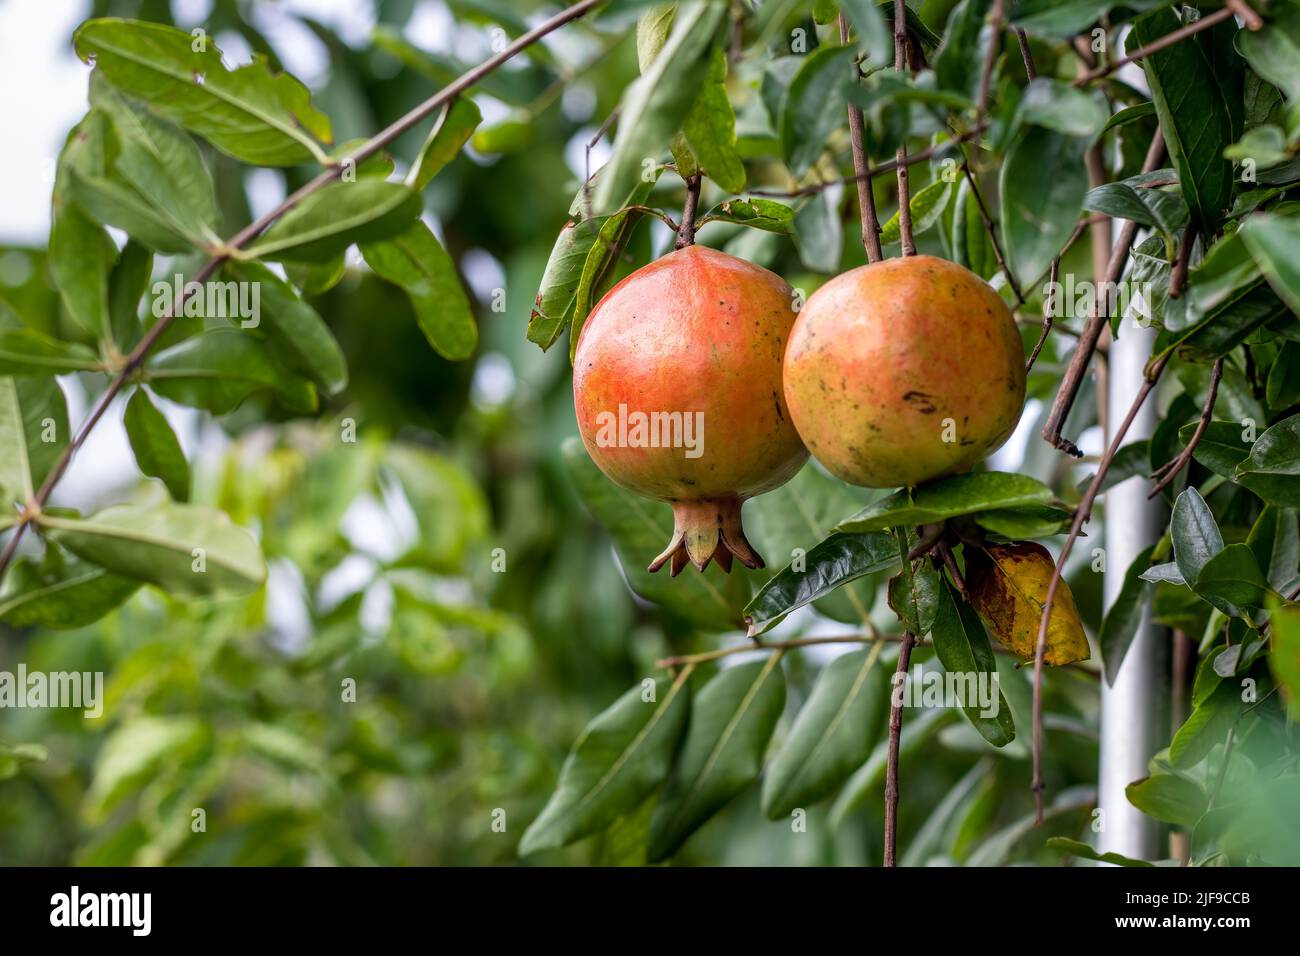 Mature pomegranate fruit hanging in the garden with copy space Stock Photo